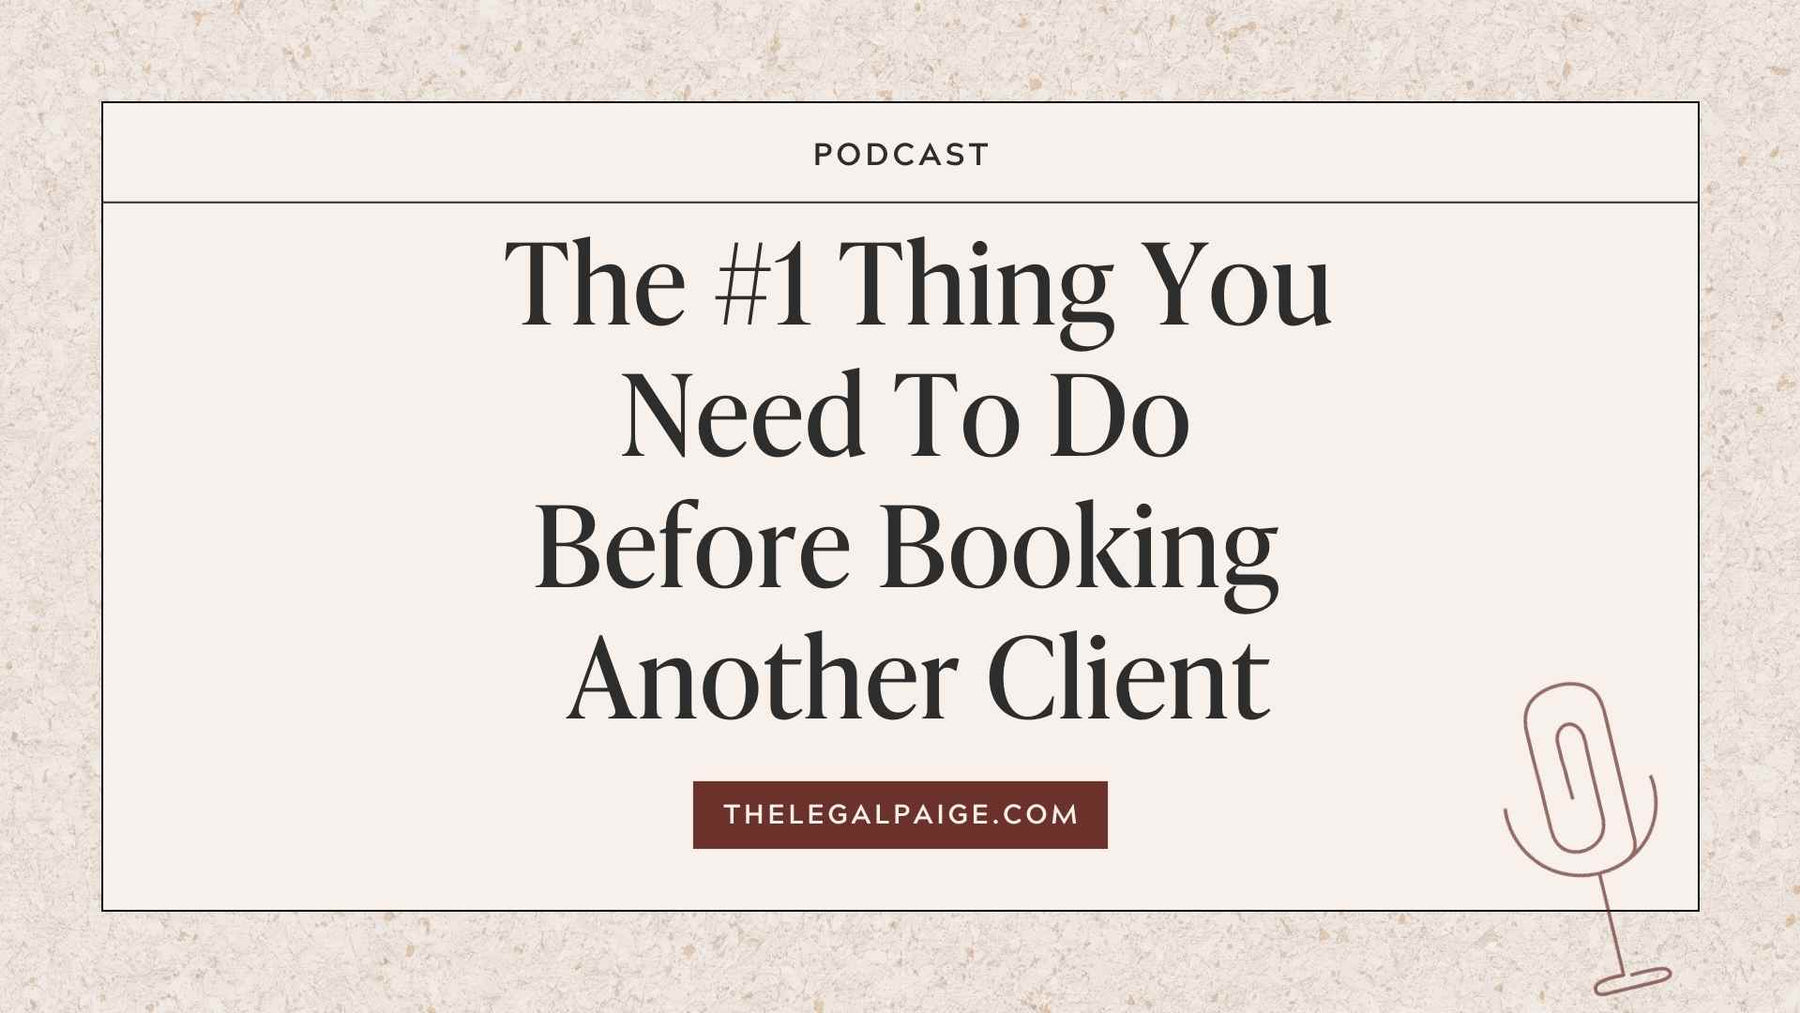 Episode 69: The #1 Thing You Need To Do Before Booking Another Client